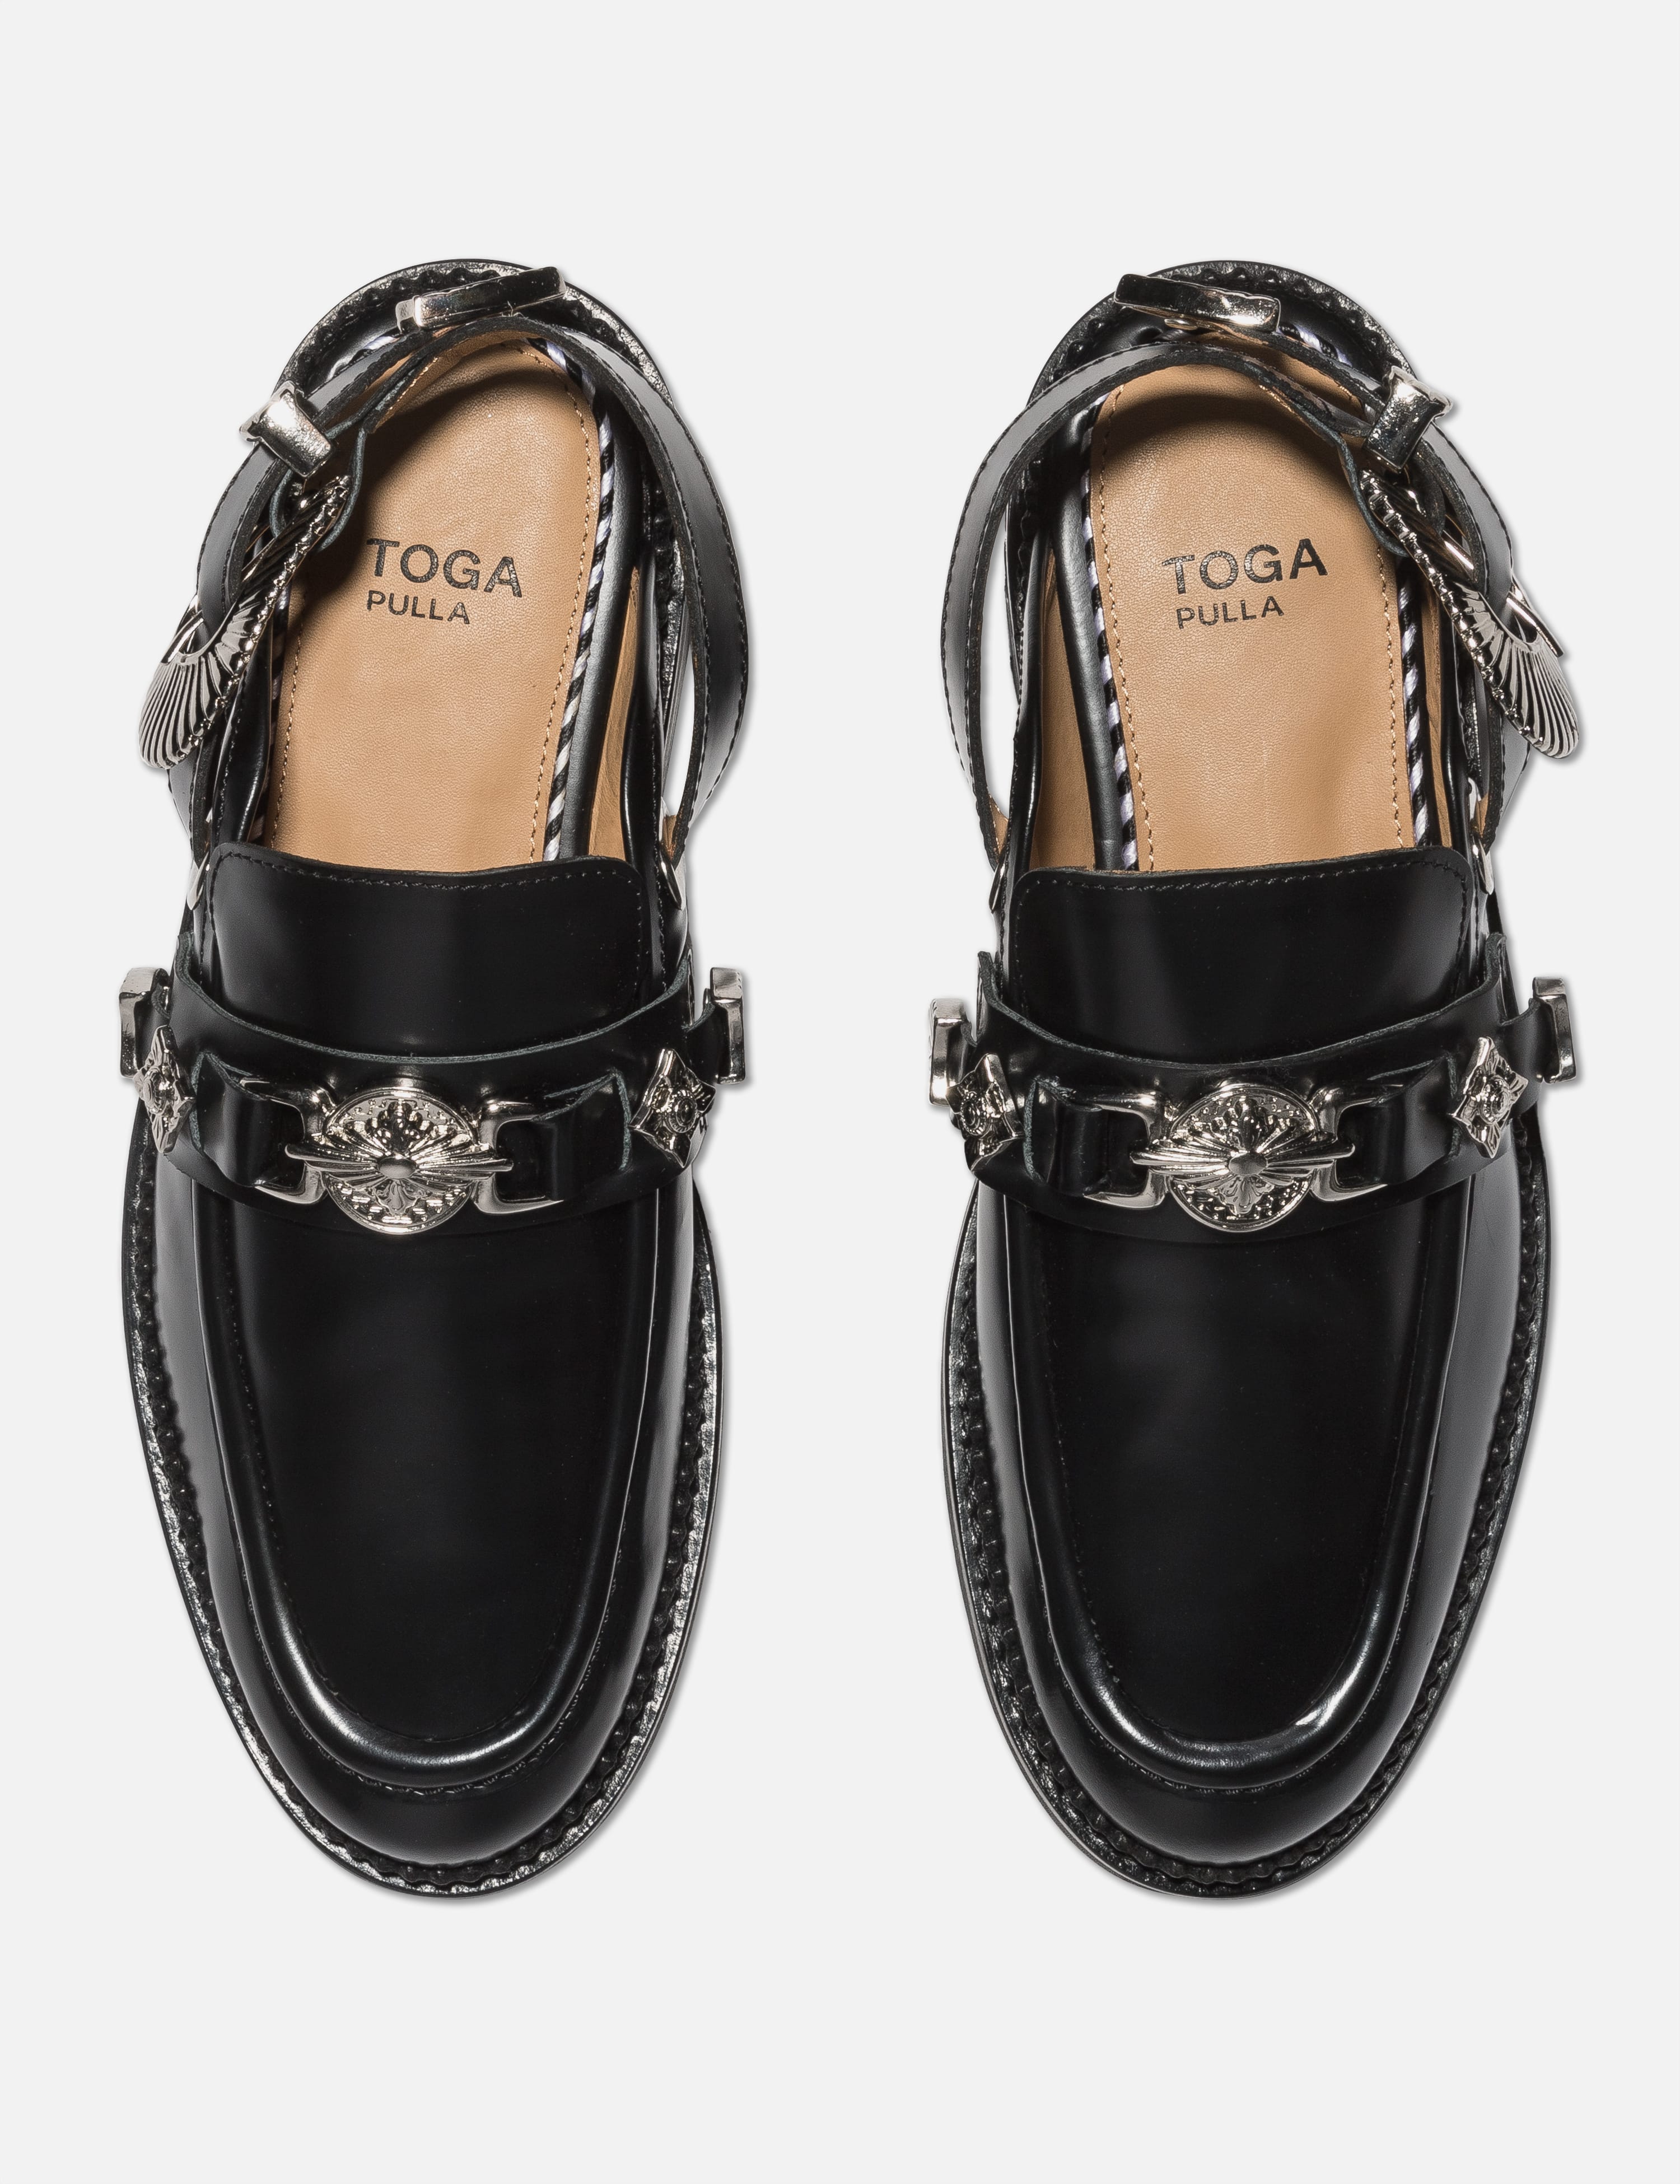 Toga Pulla - Metal Mule Loafer | HBX - Globally Curated Fashion